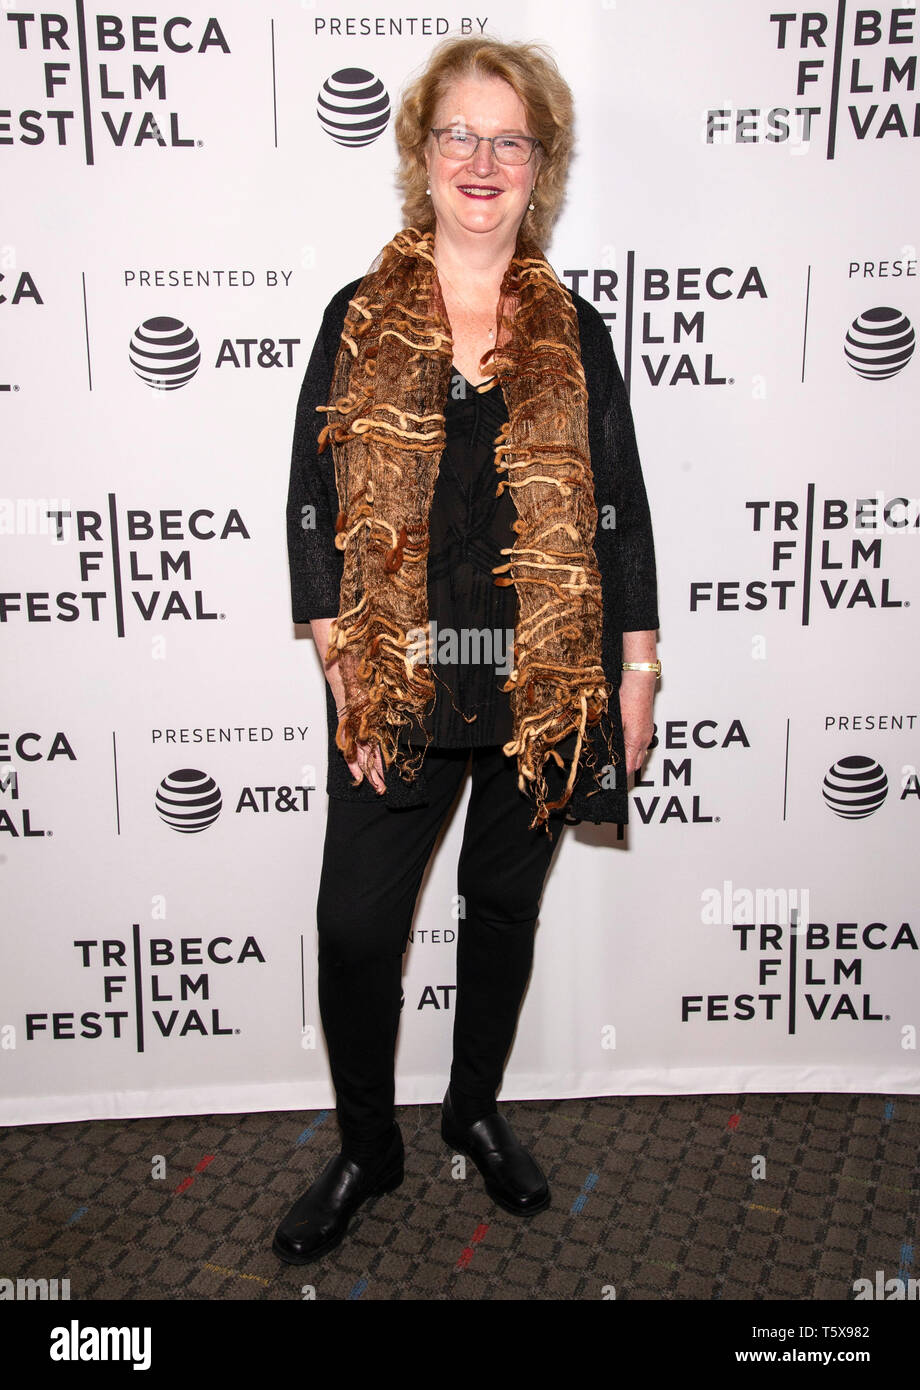 New York, NY - April 26, 2019: Marceline Hugot attends the 'Blow The Man Down' screening during the 2019 Tribeca Film Festival at SVA Theater Stock Photo